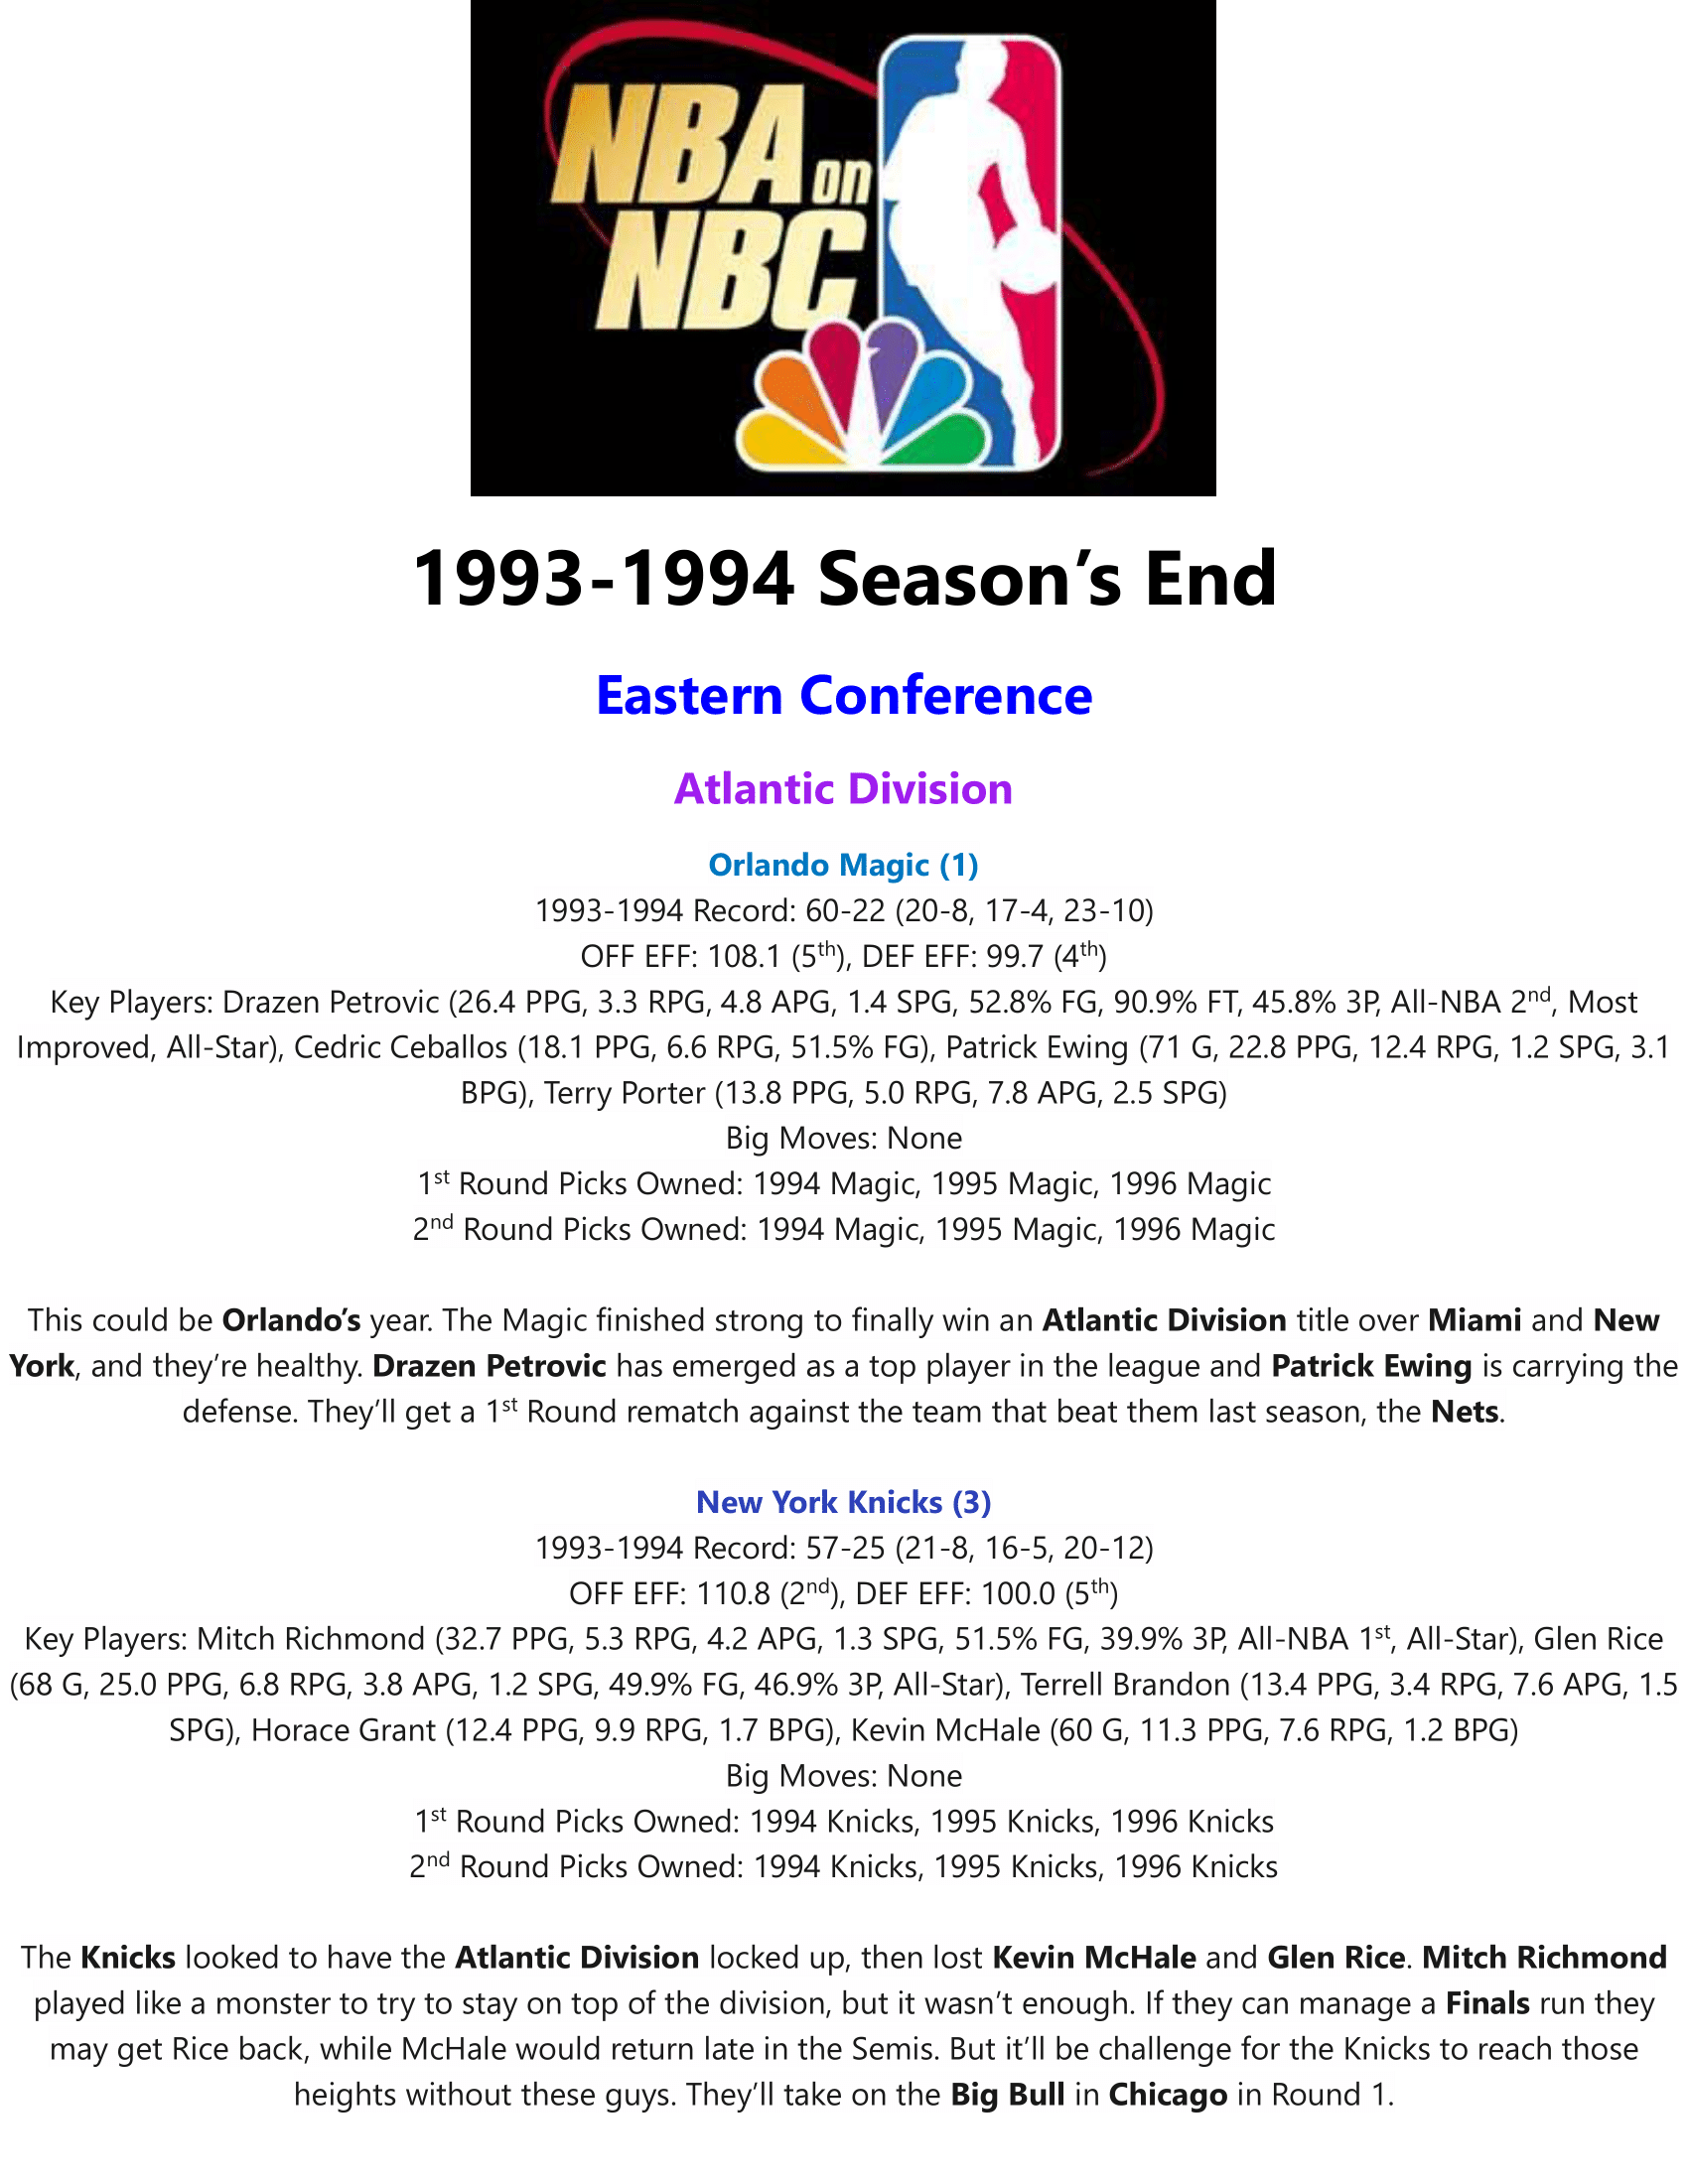 93-94-Part-3-Through-End-of-the-Season-01.png